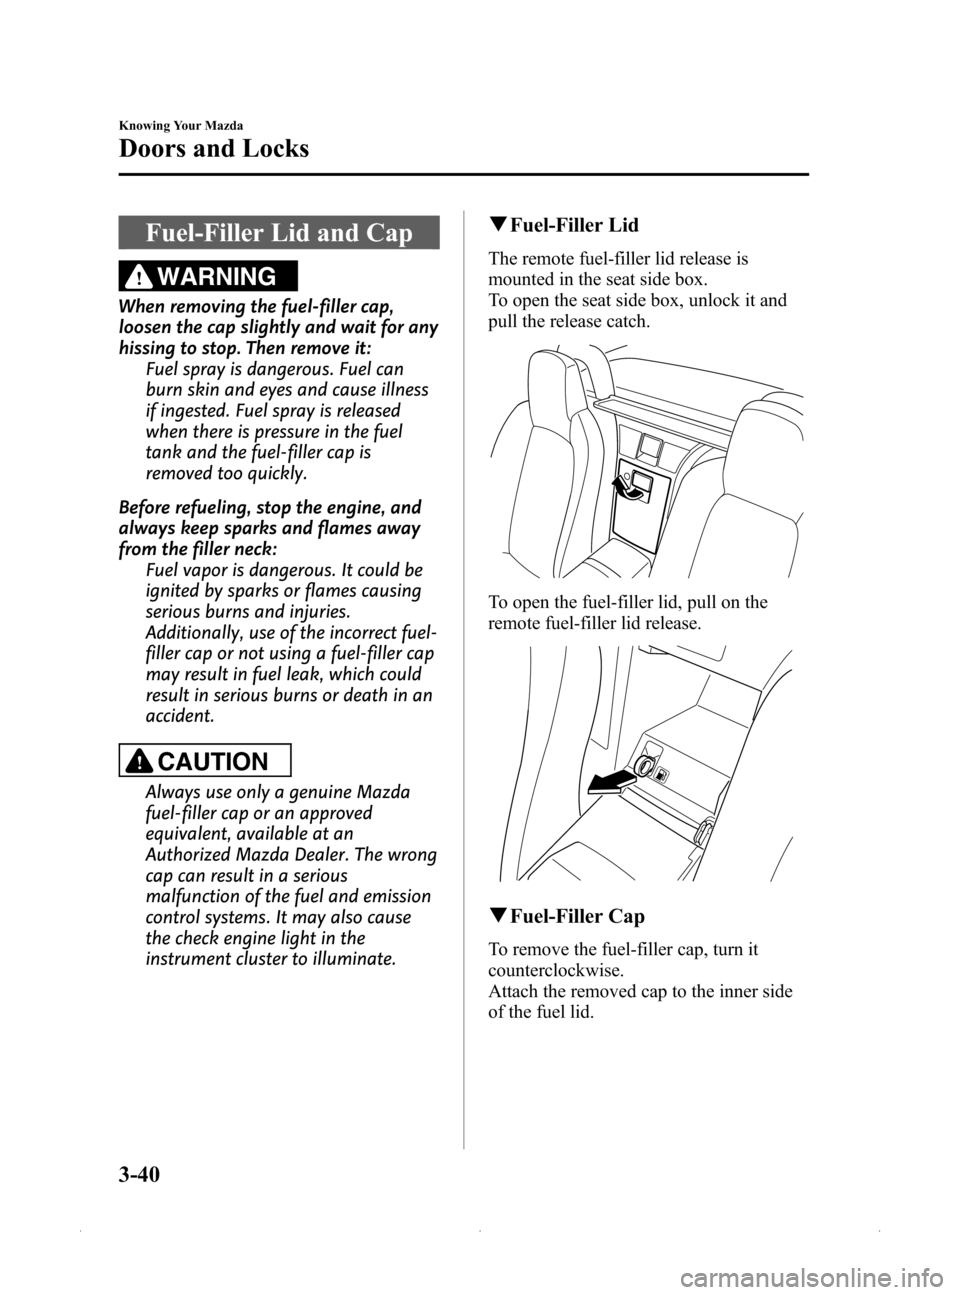 MAZDA MODEL MX-5 PRHT 2015  Owners Manual (in English) Black plate (94,1)
Fuel-Filler Lid and Cap
WARNING
When removing the fuel-filler cap,
loosen the cap slightly and wait for any
hissing to stop. Then remove it:Fuel spray is dangerous. Fuel can
burn sk